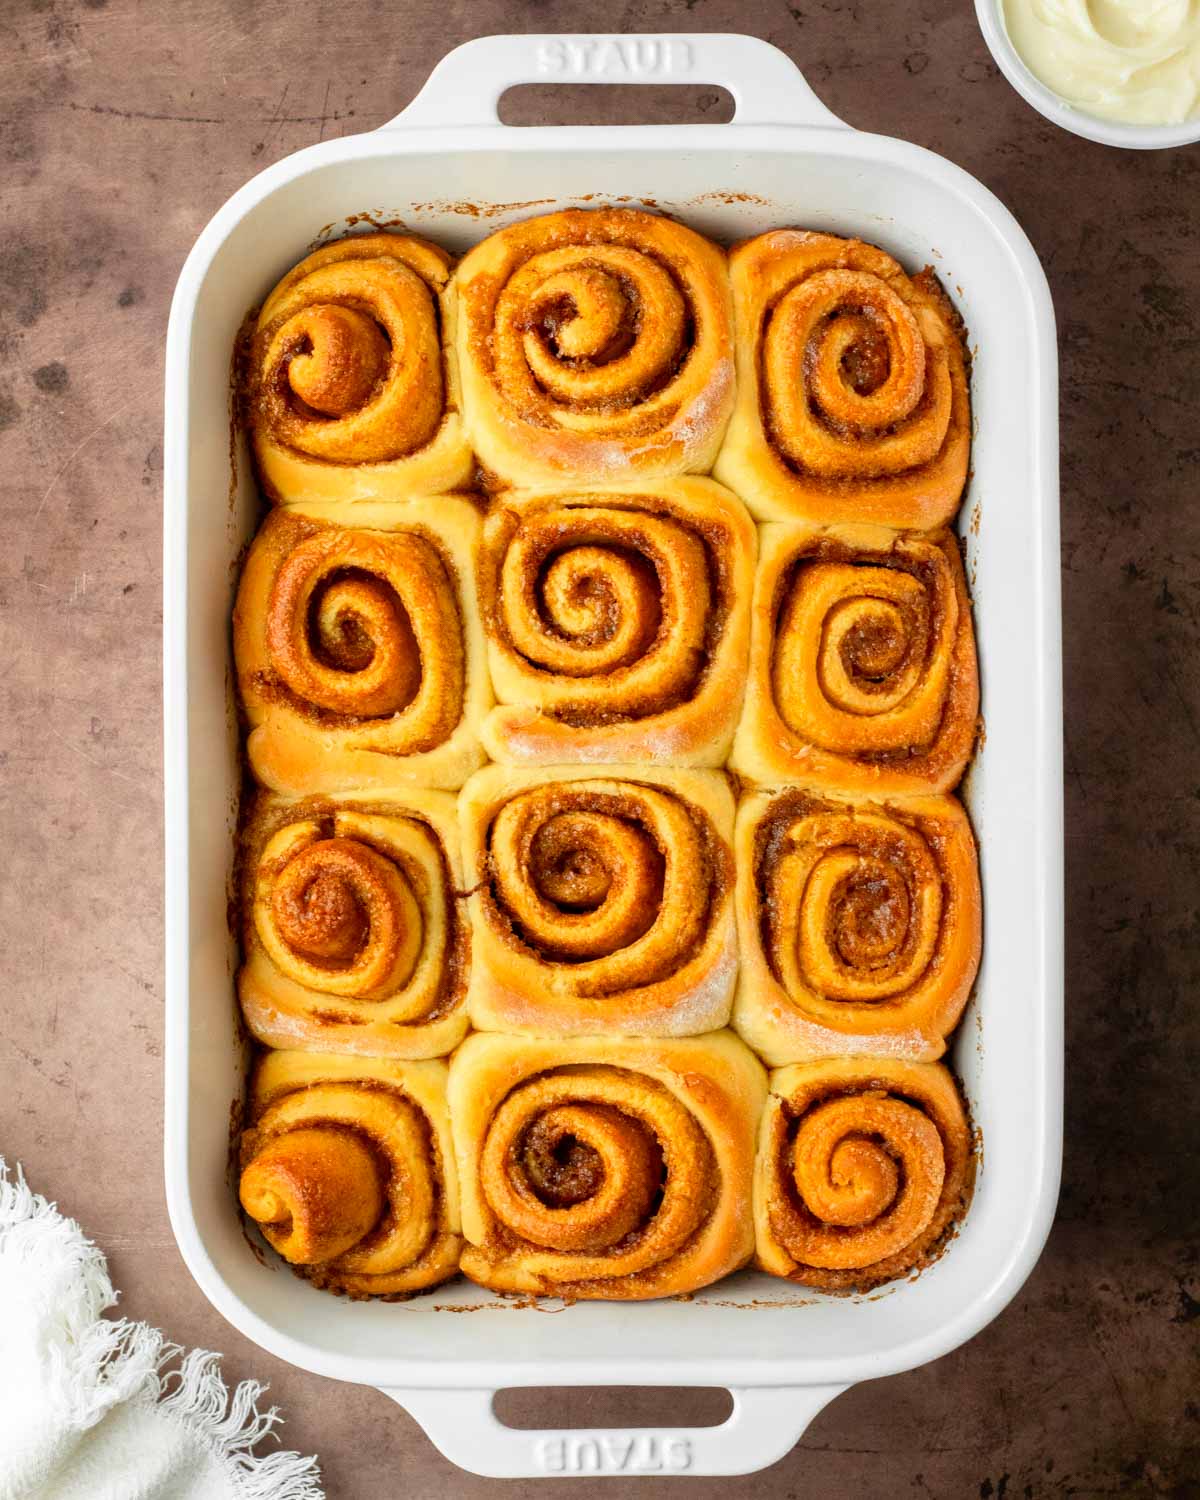 These cinnamon rolls with cream cheese frosting are a classic cinnamon roll recipe made with pantry-staple ingredients for an easy and delicious homemade cinnamon roll.